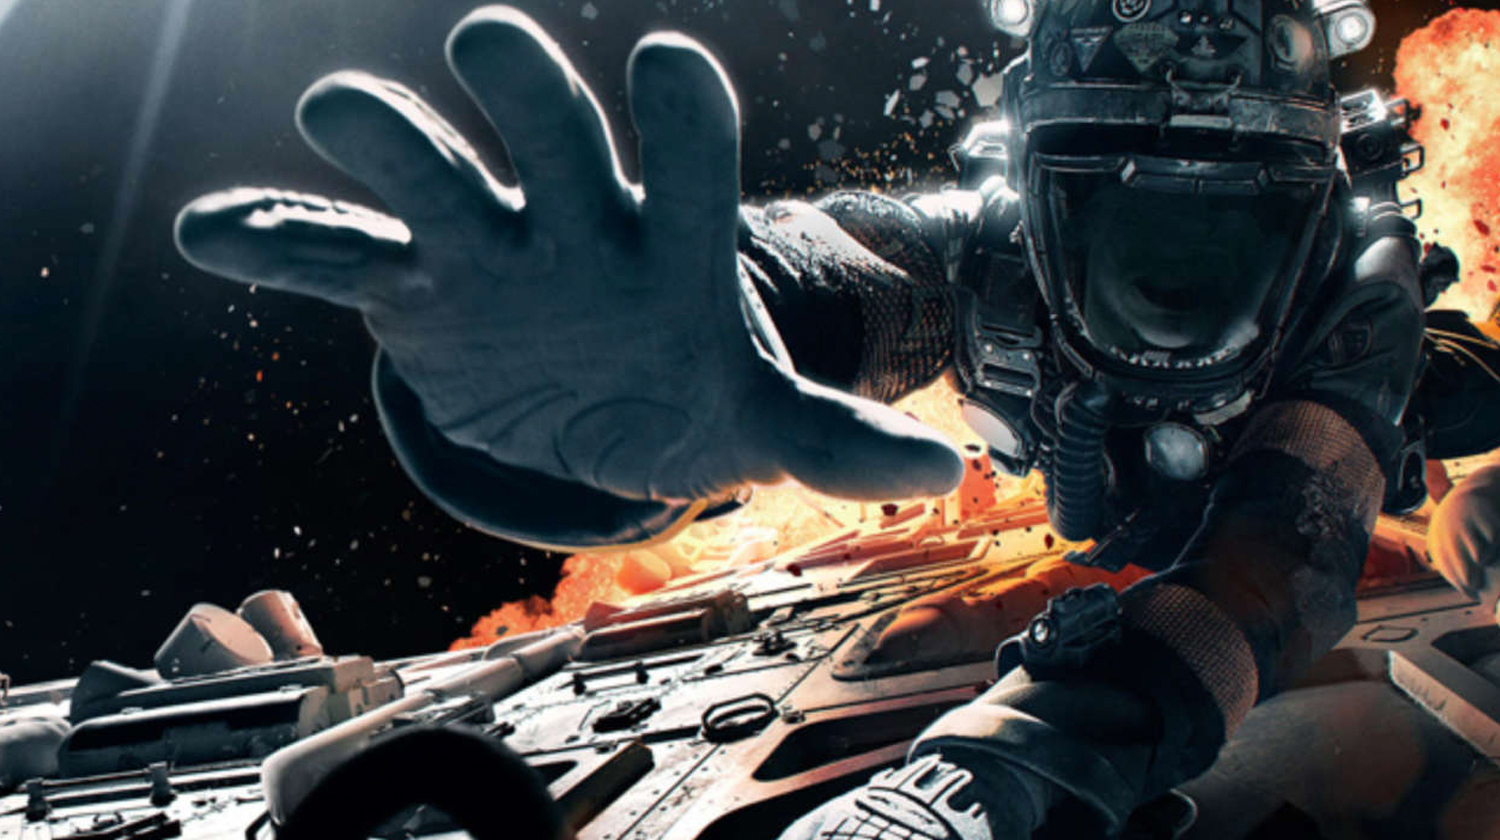 'The Expanse' is back! Check out the first teaser for the sixth (and final) season thumbnail